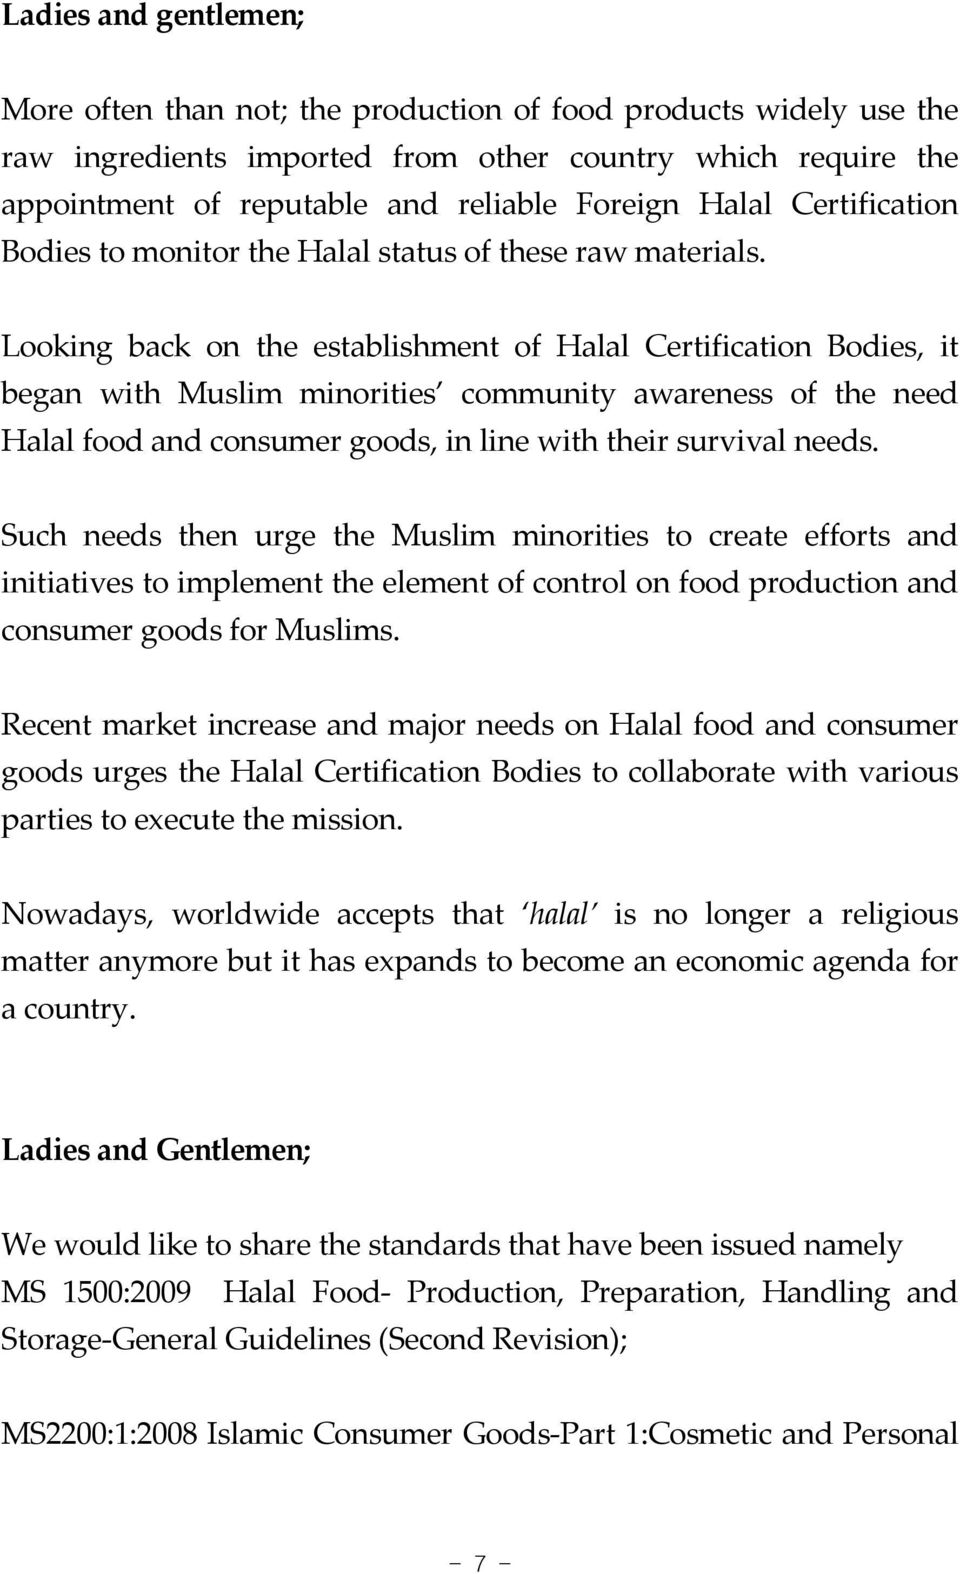 Looking back on the establishment of Halal Certification Bodies, it began with Muslim minorities community awareness of the need Halal food and consumer goods, in line with their survival needs.